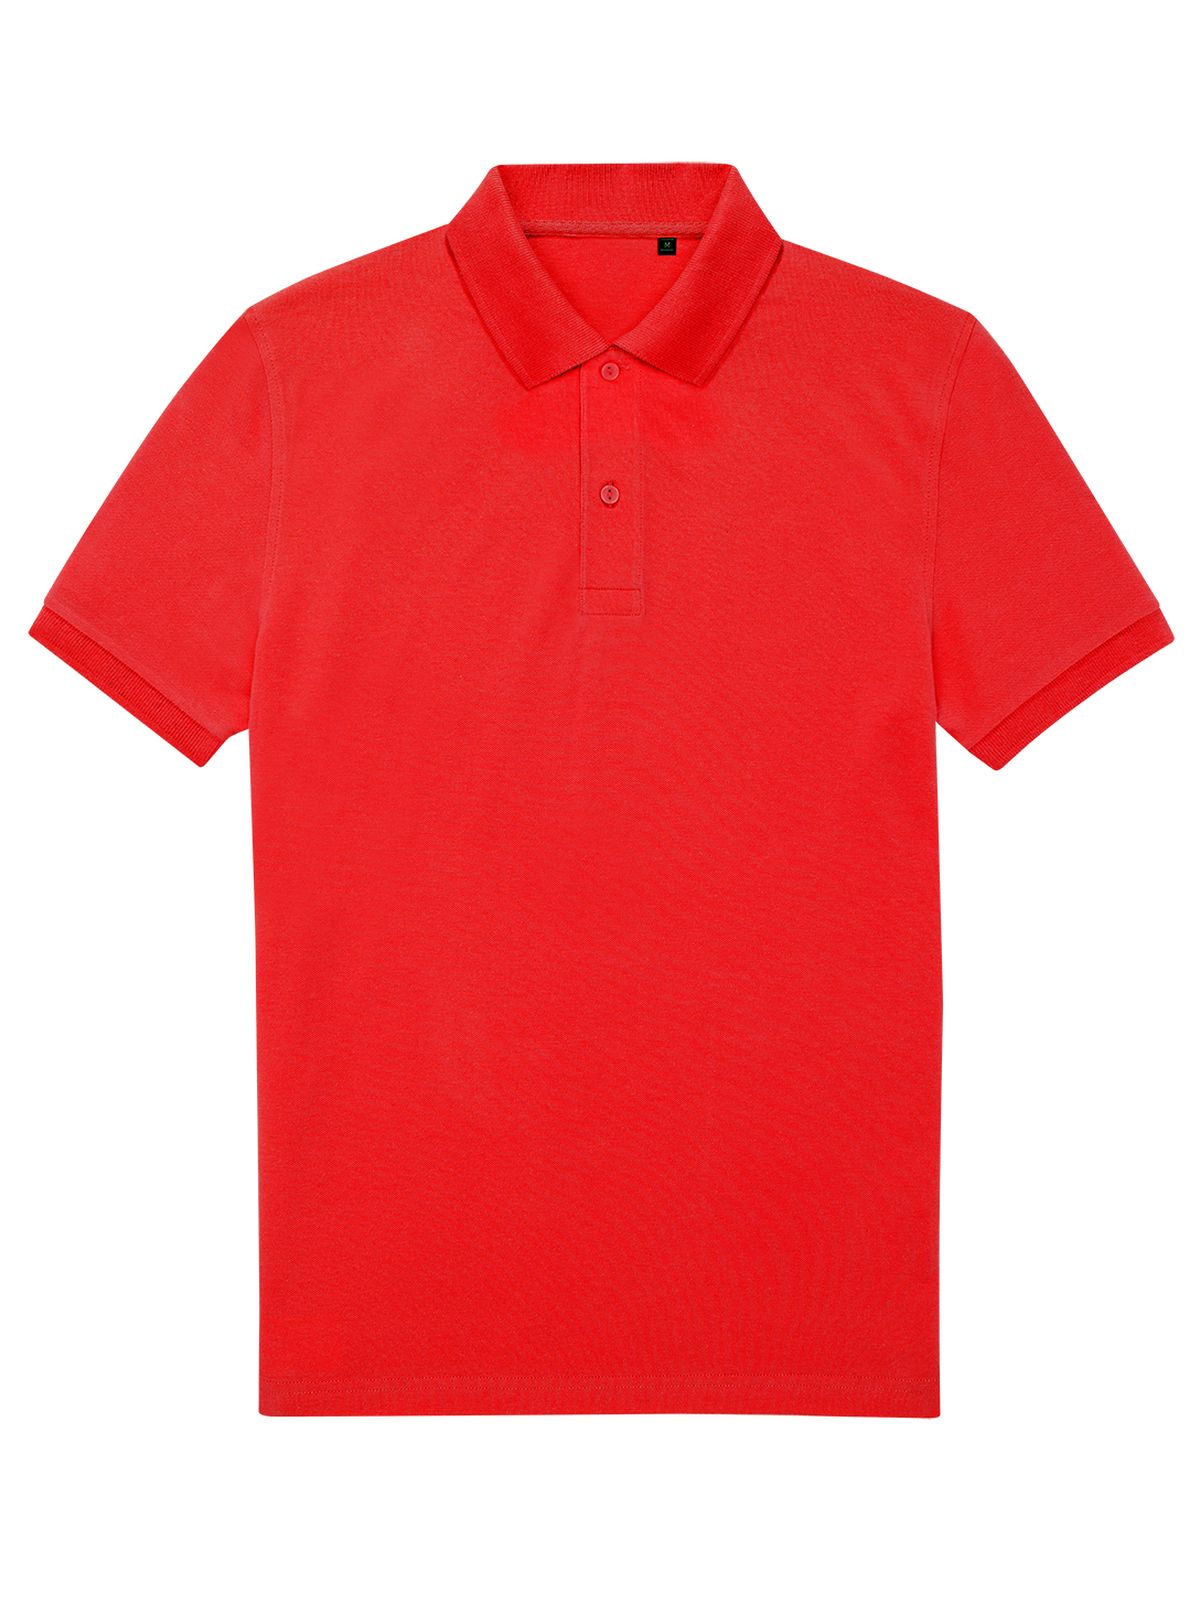 bc-my-eco-polo-65-35-red.webp